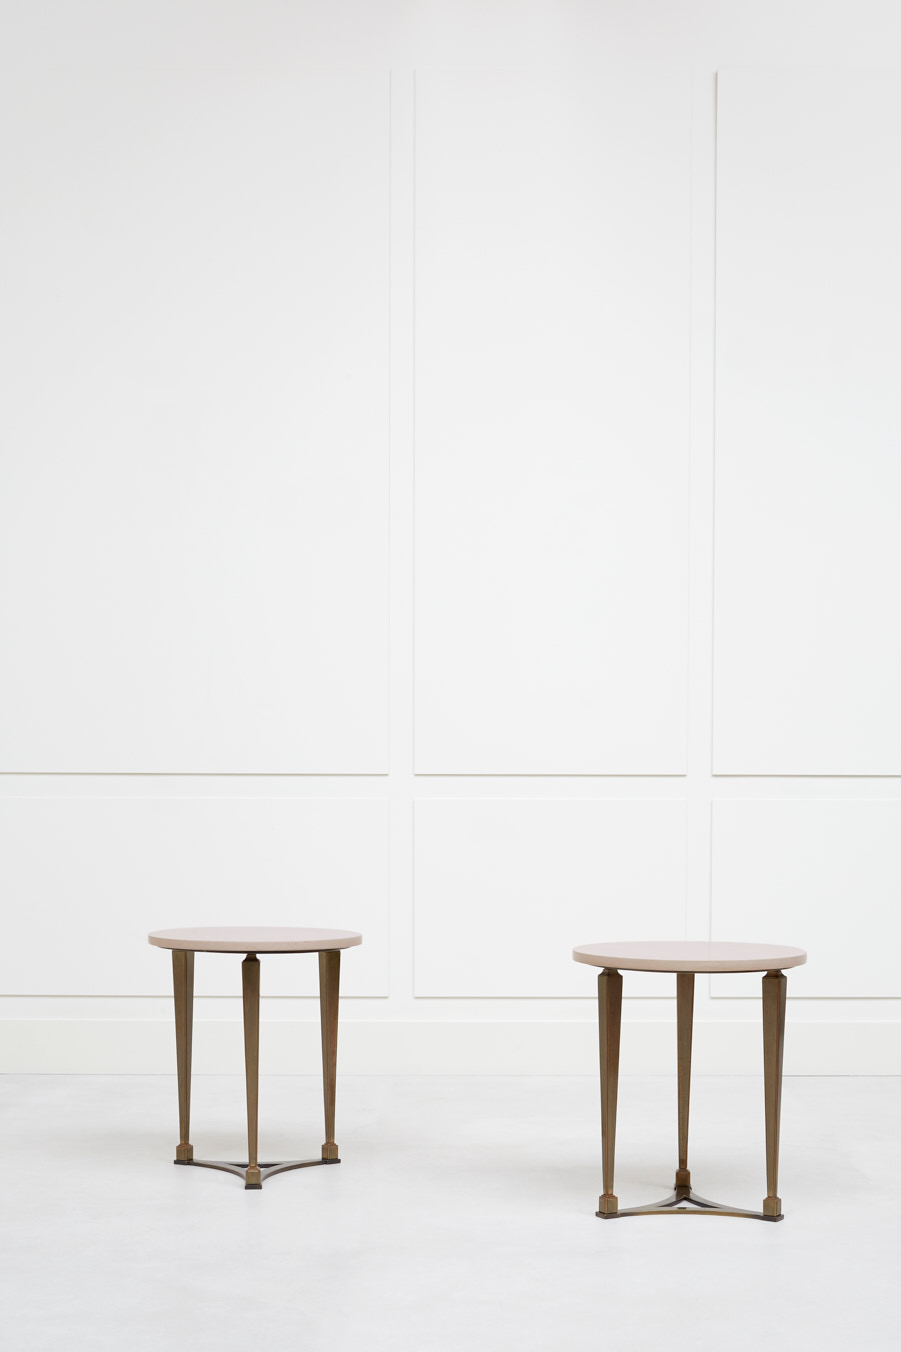 Jacques Quinet, Pair of side tables, vue 02